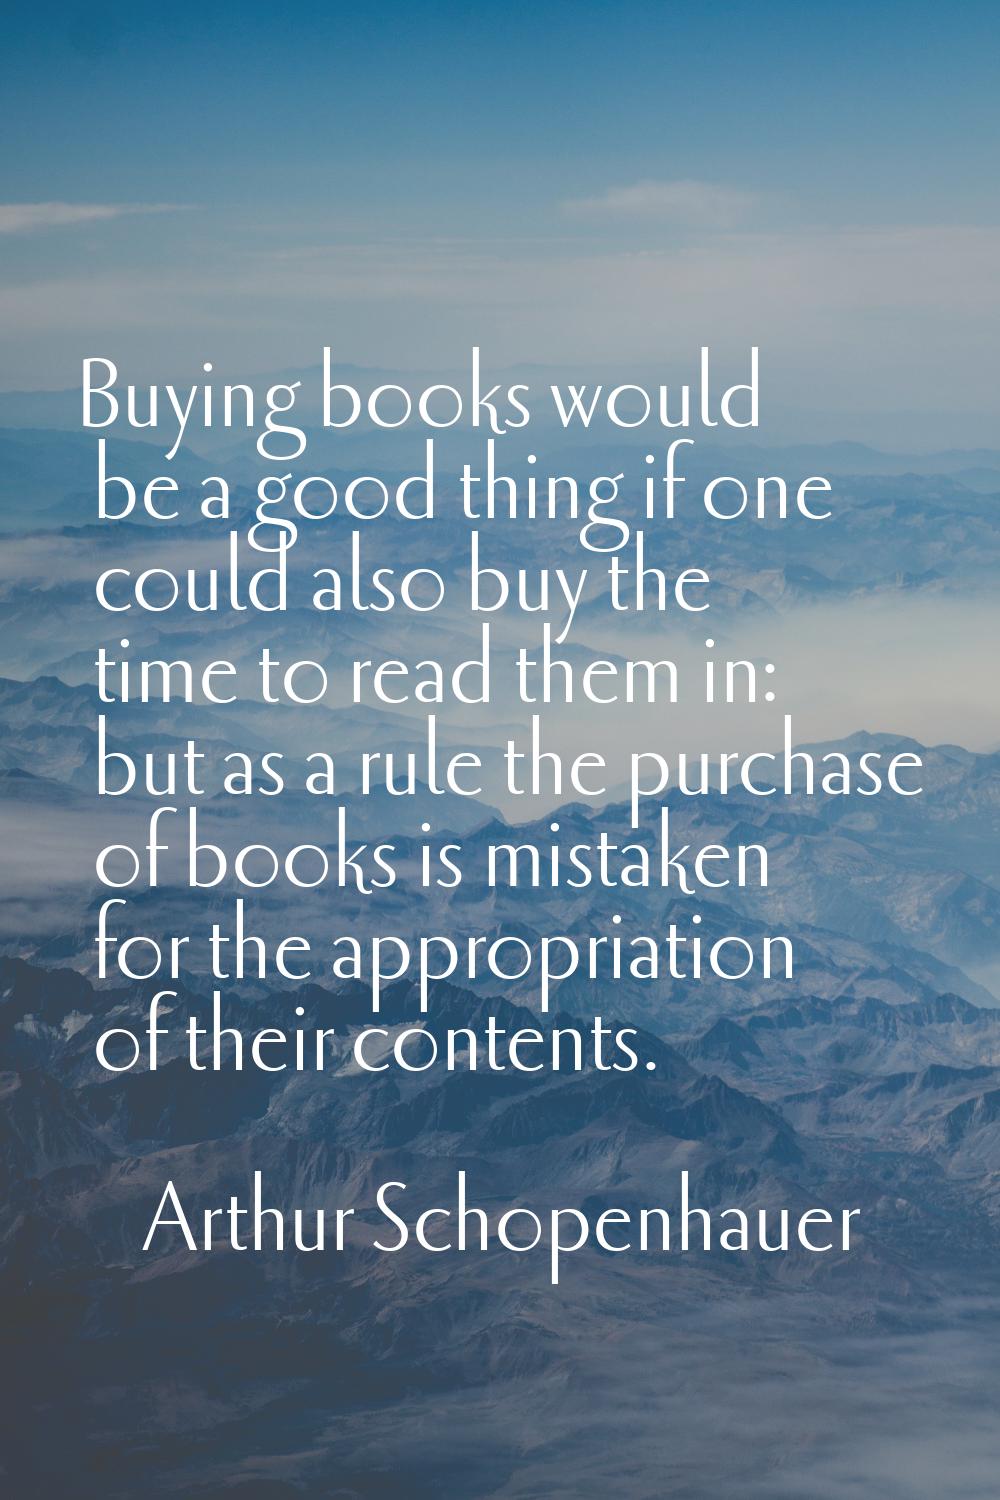 Buying books would be a good thing if one could also buy the time to read them in: but as a rule th